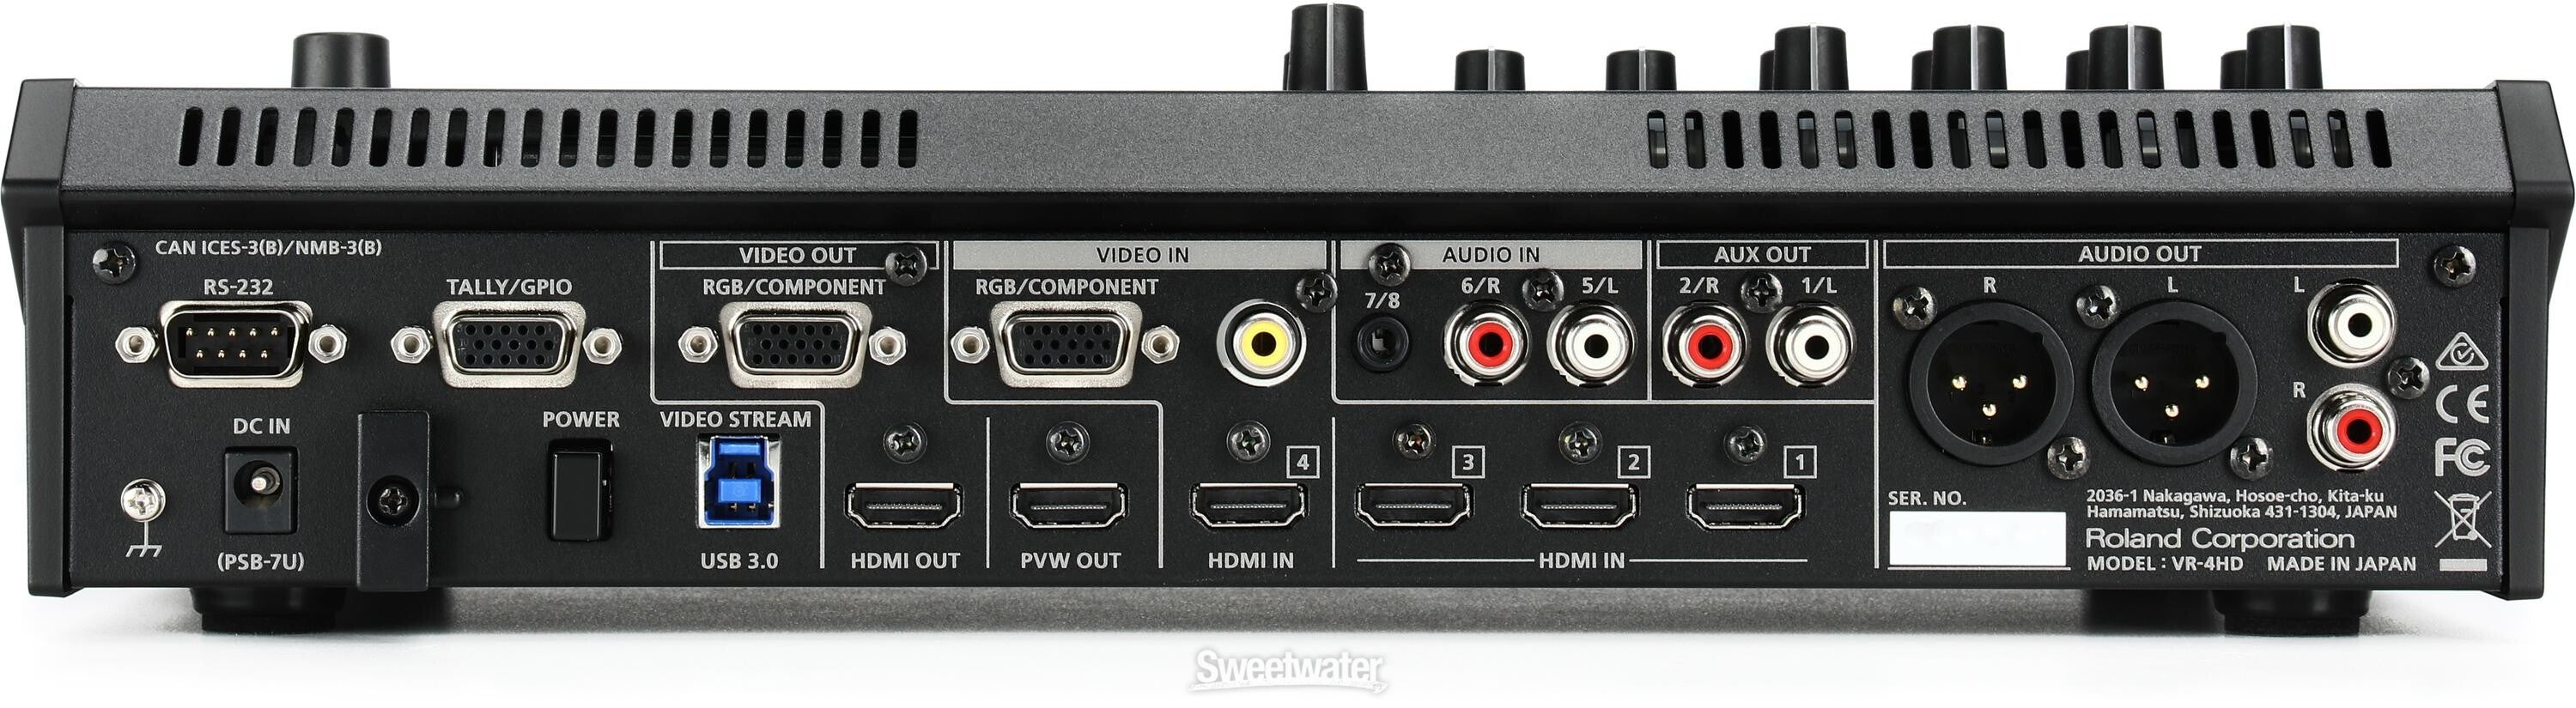 Roland VR-4HD HD A/V Mixer | Sweetwater